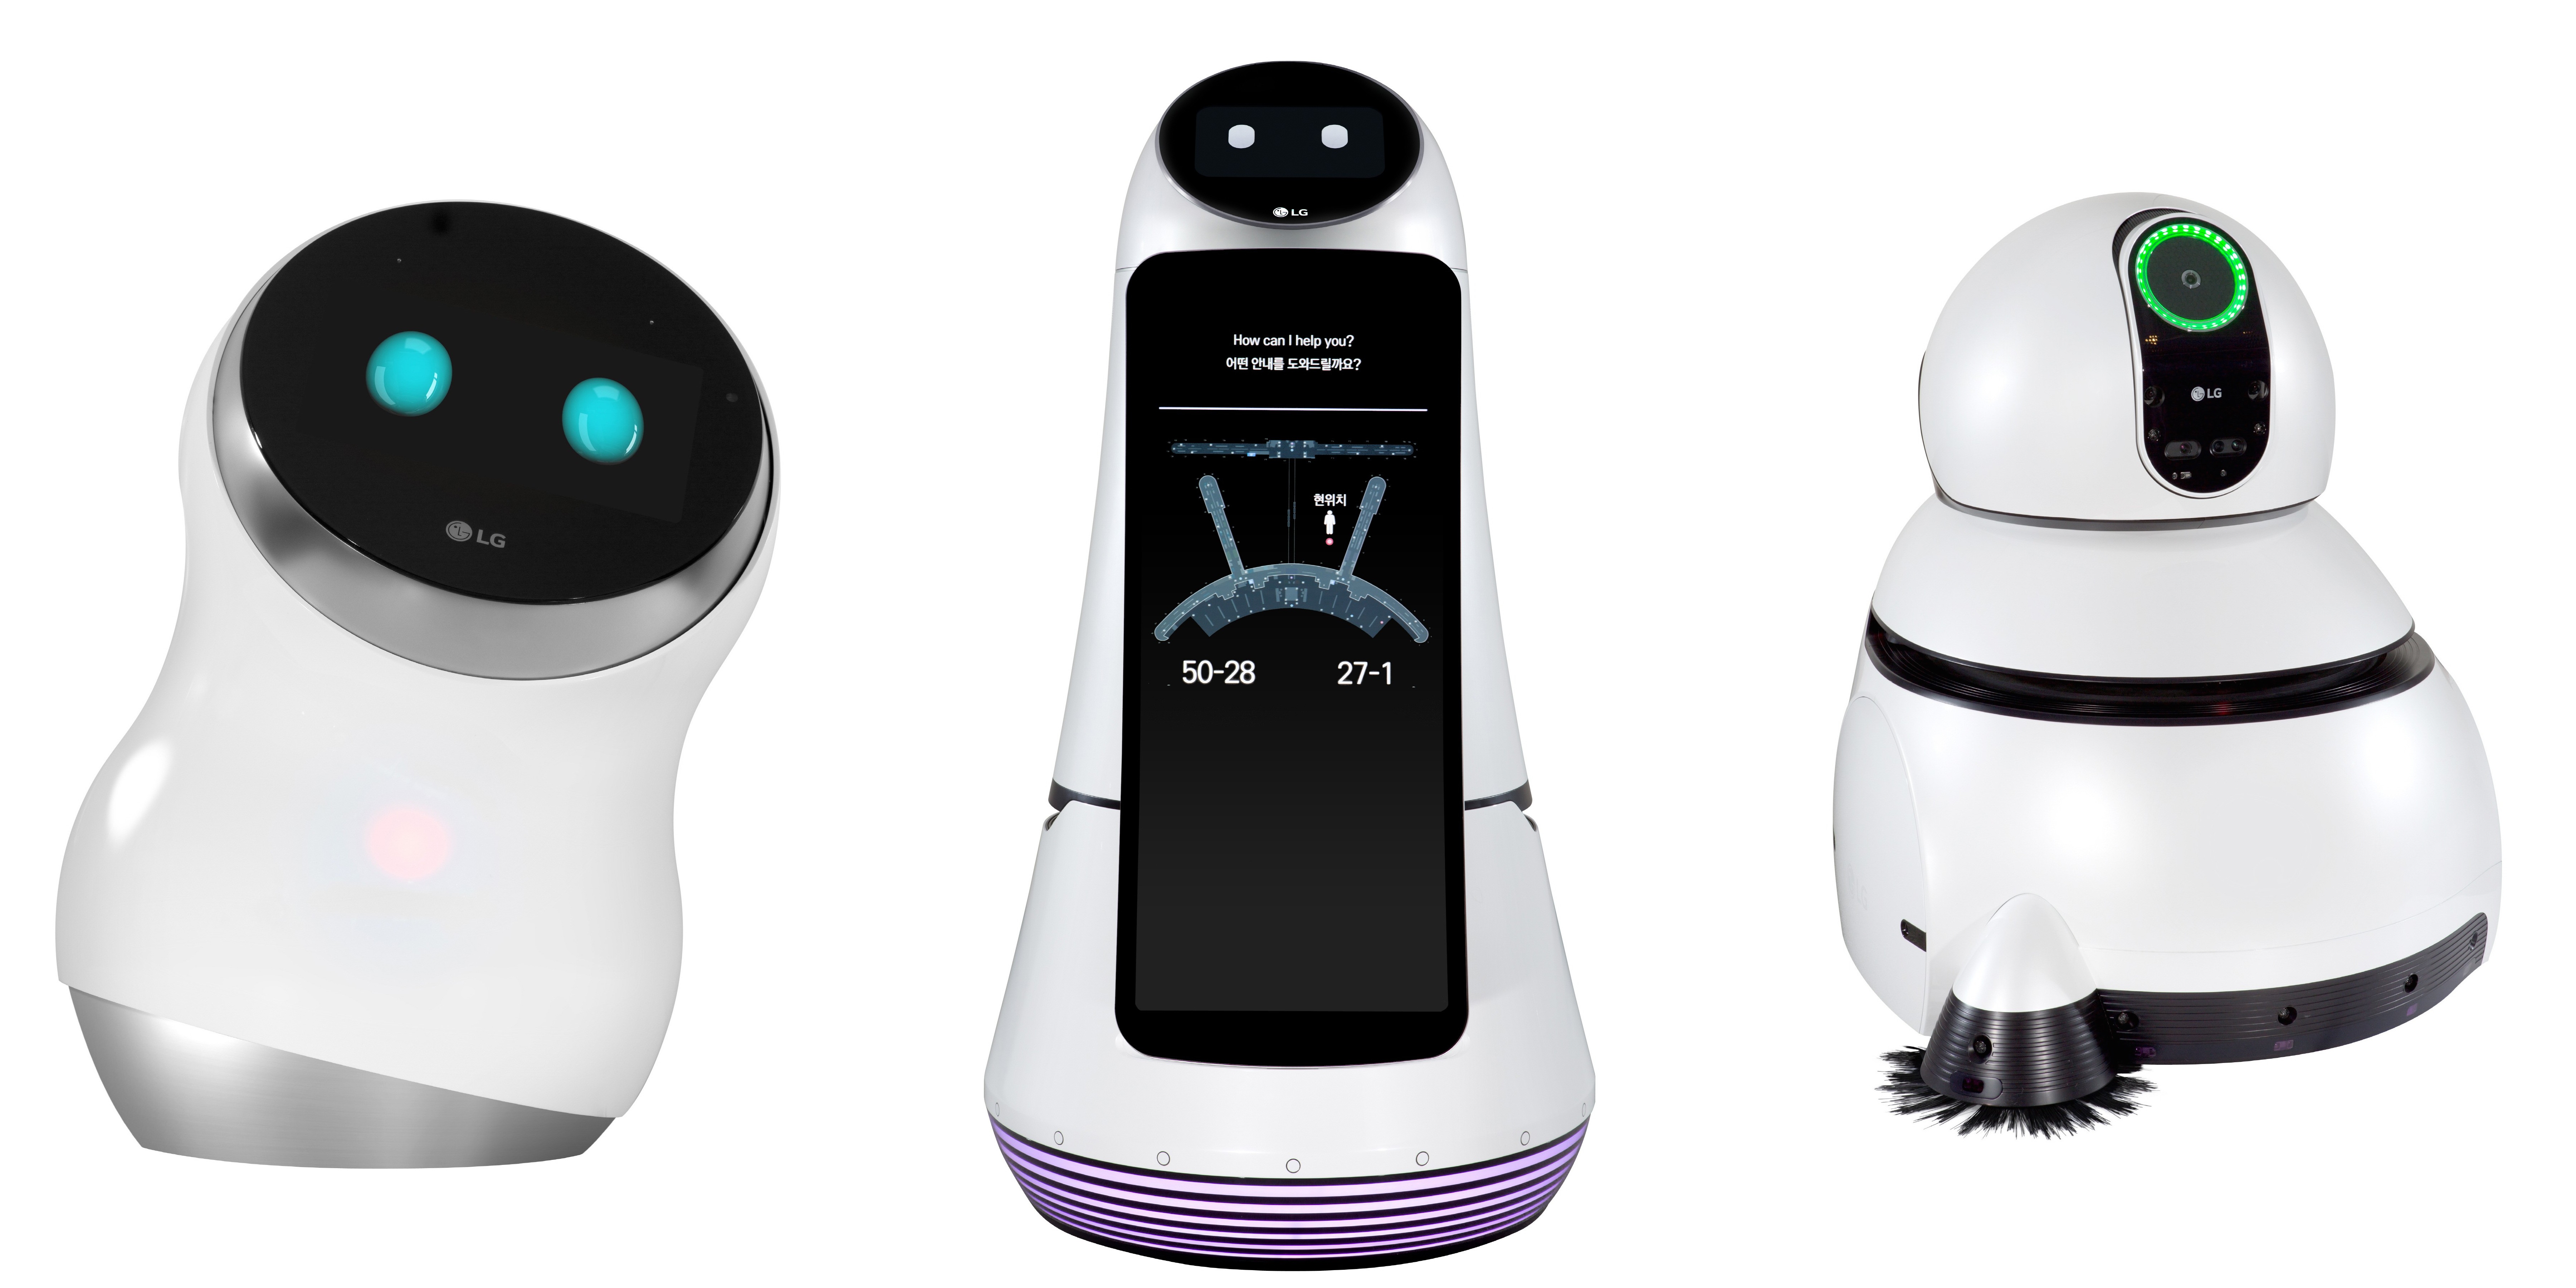 LG tries to take over the world with new lineup of adorable lifesize